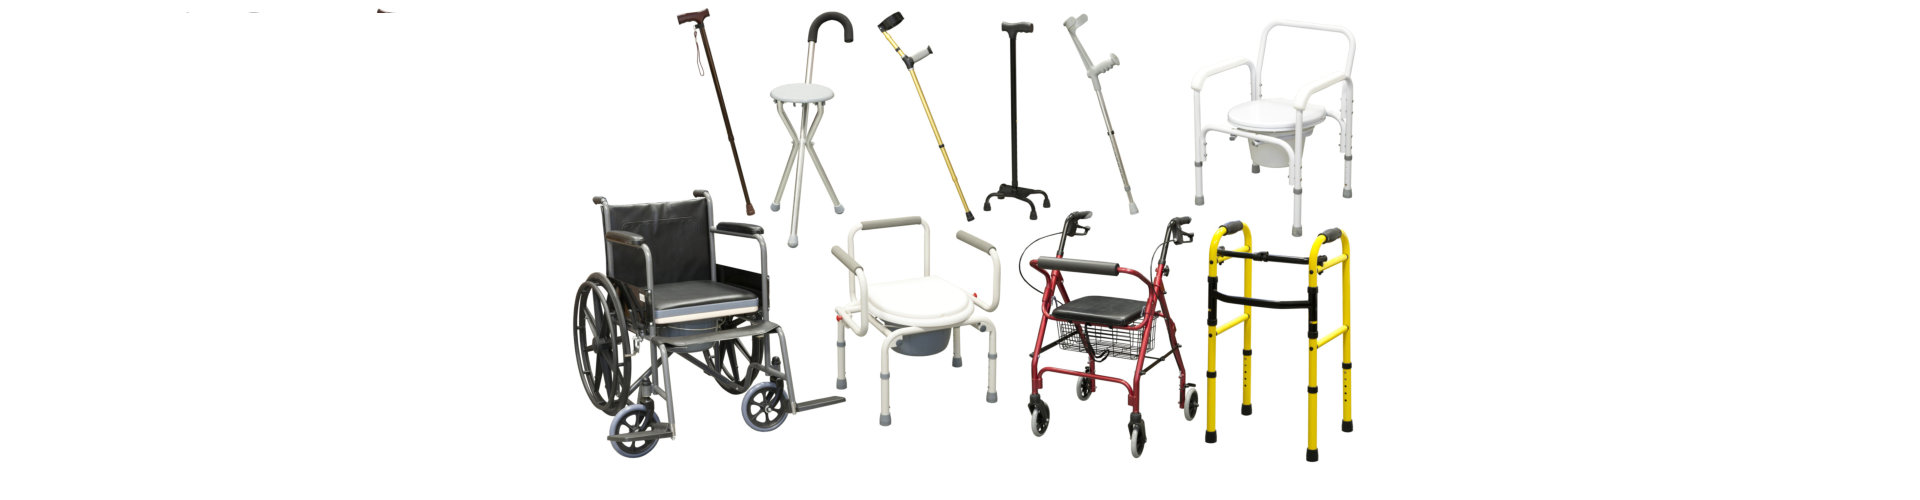 different types of medical equipment